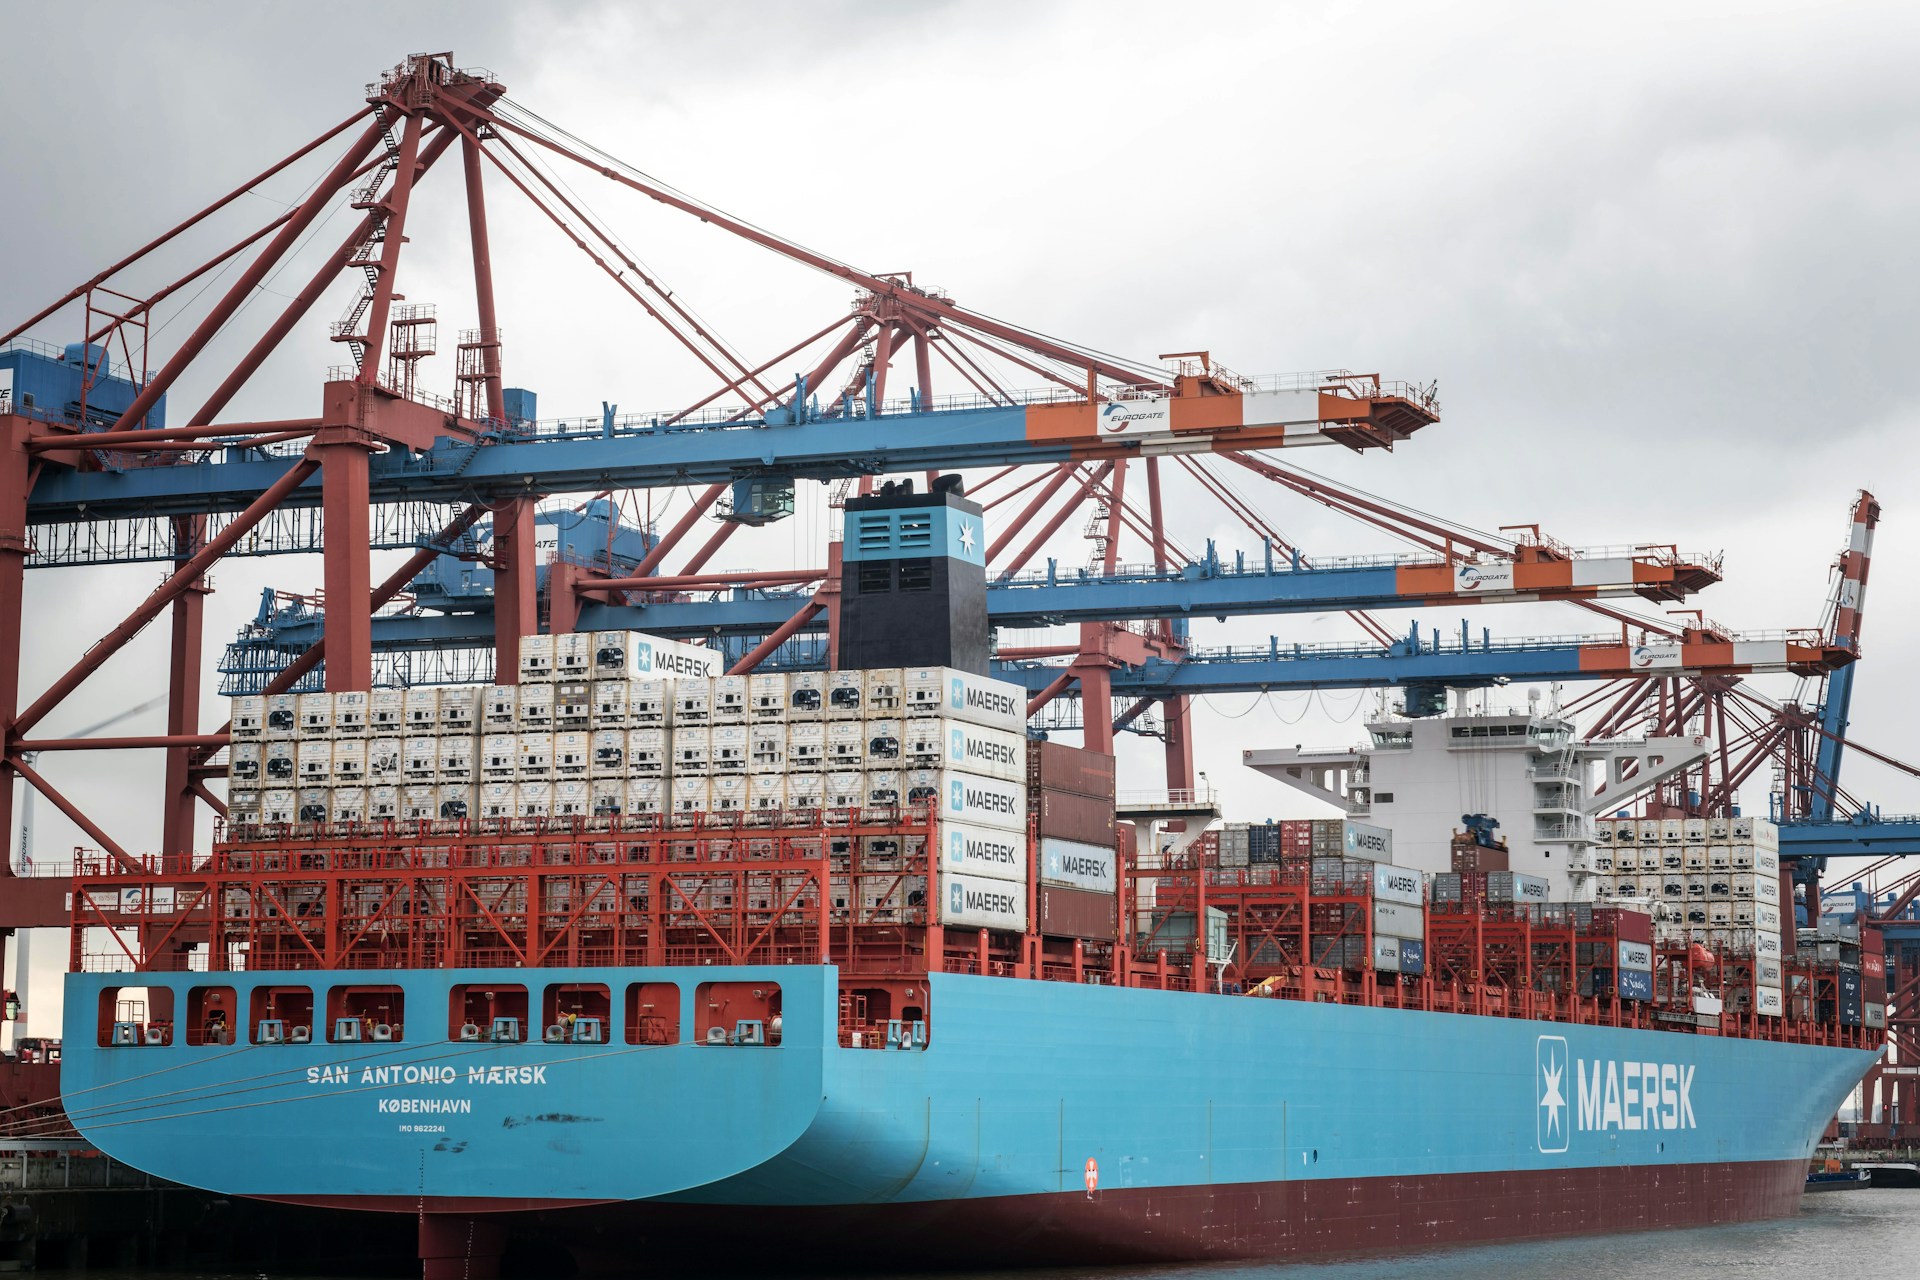 A Maersk container ship in port